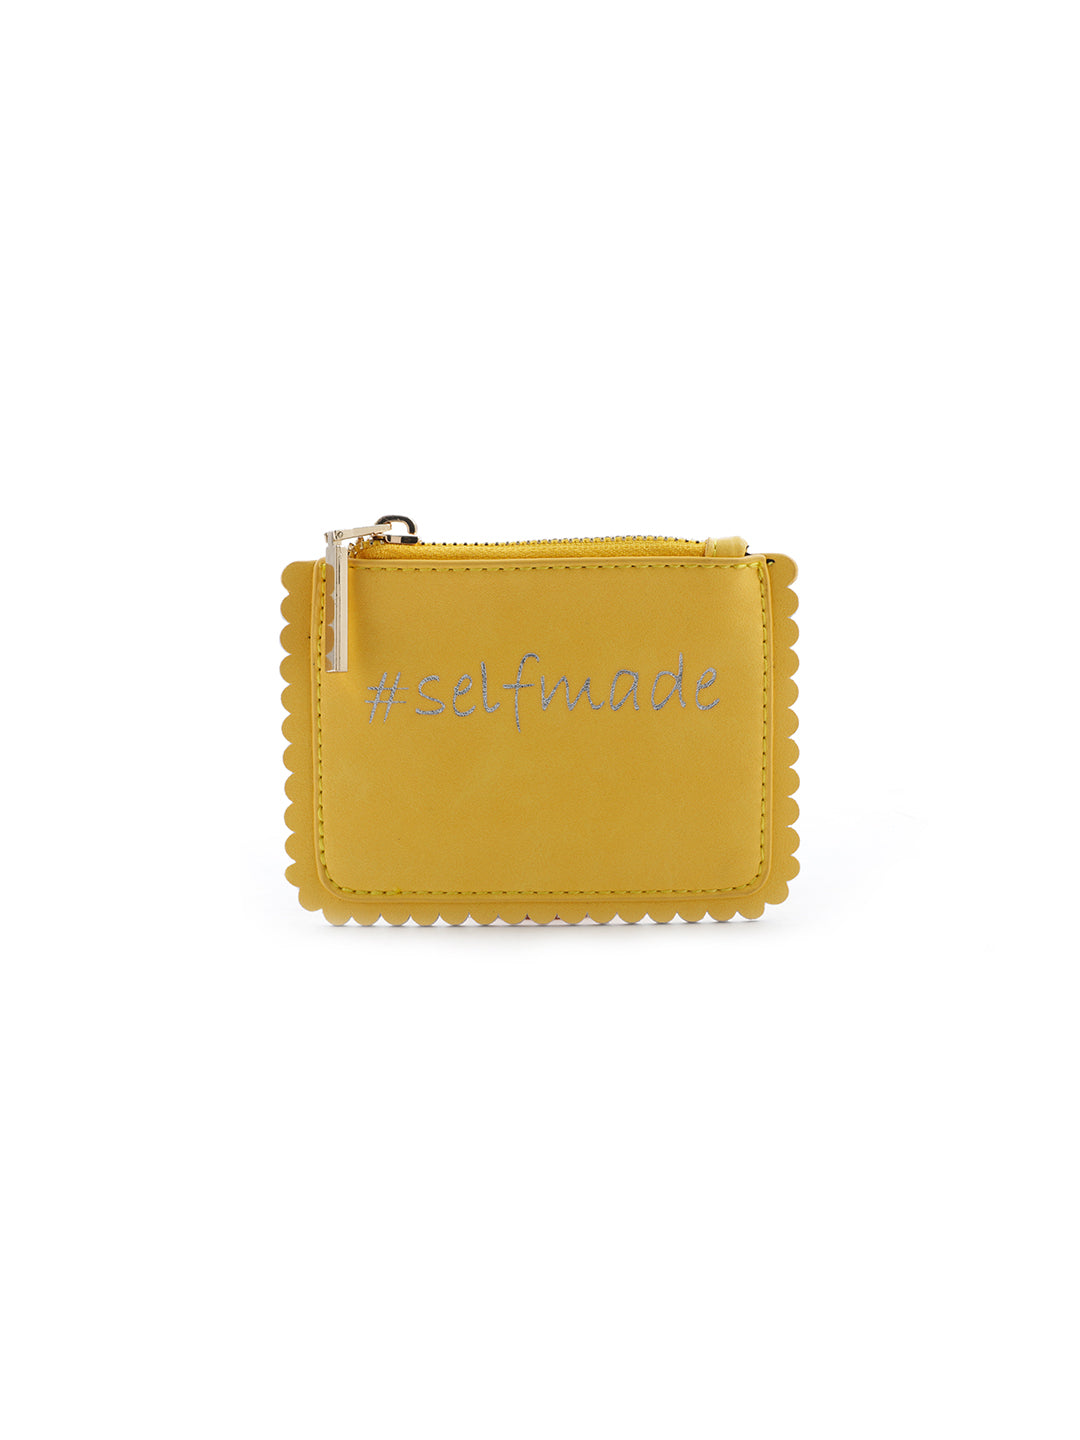 Printed Yellow Coin Purse - Yellow